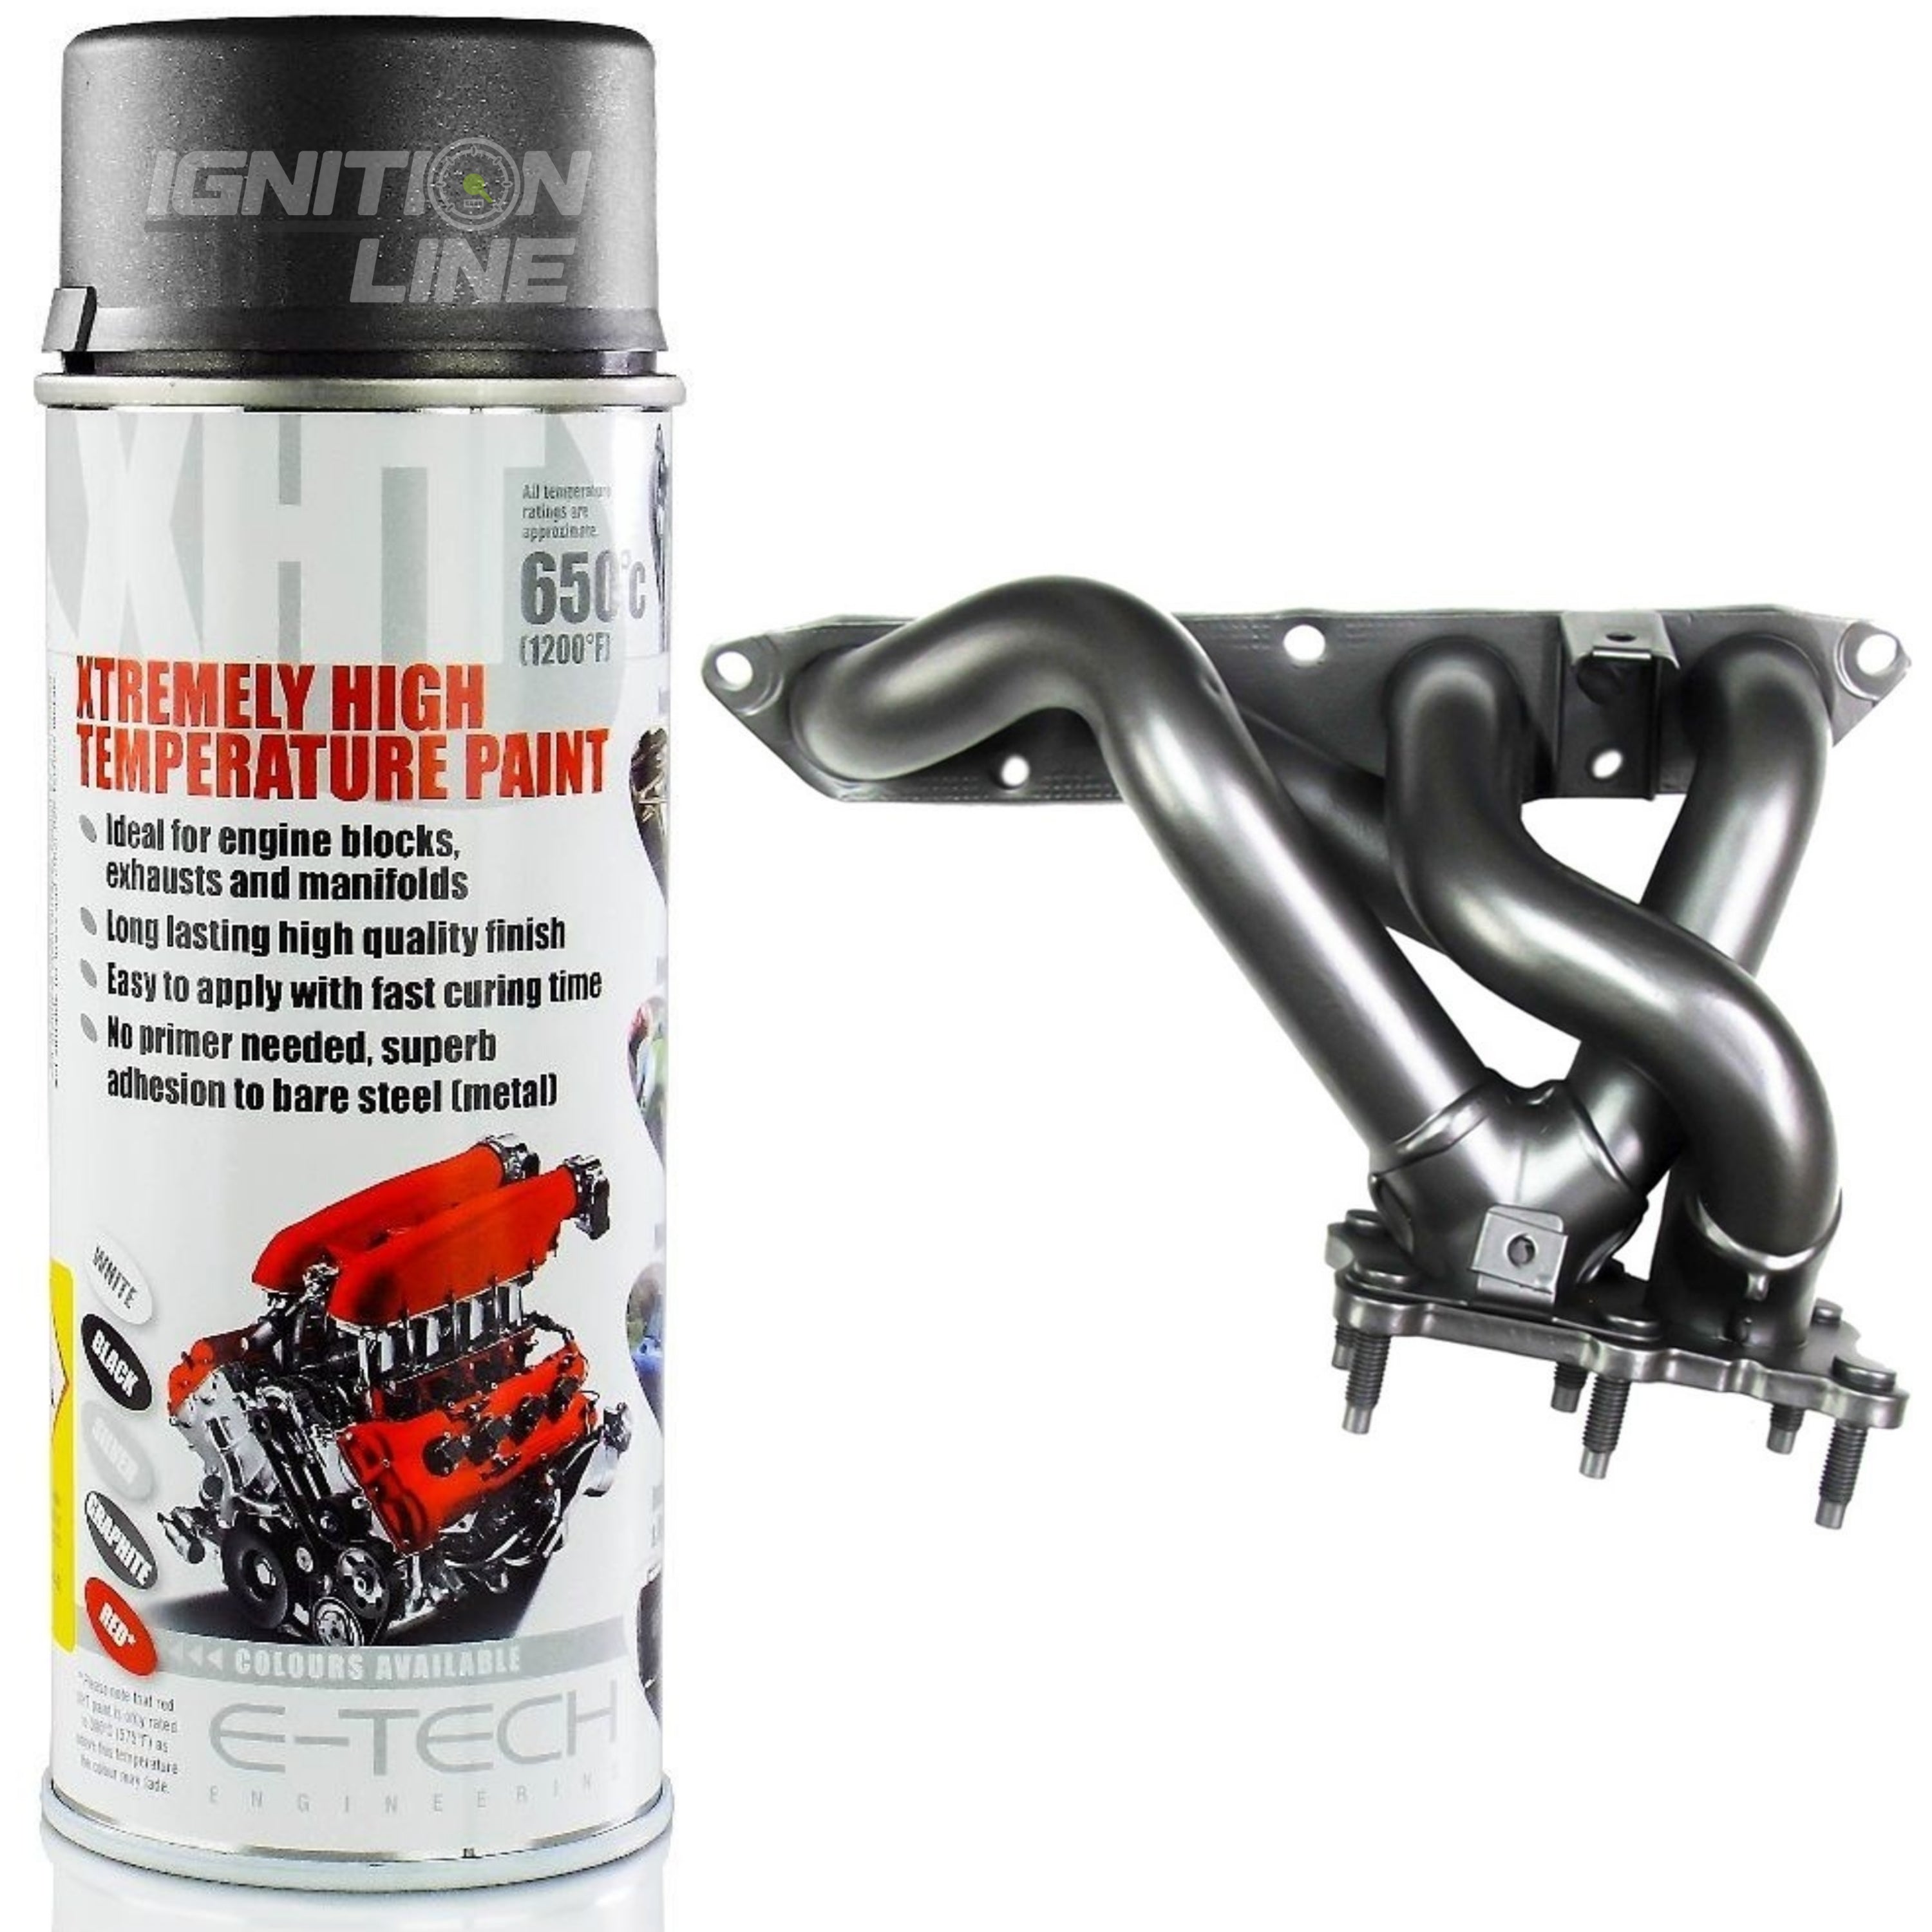 E-Tech Xht Exhaust Extremely High Temperature Paint - Graphite 400ml